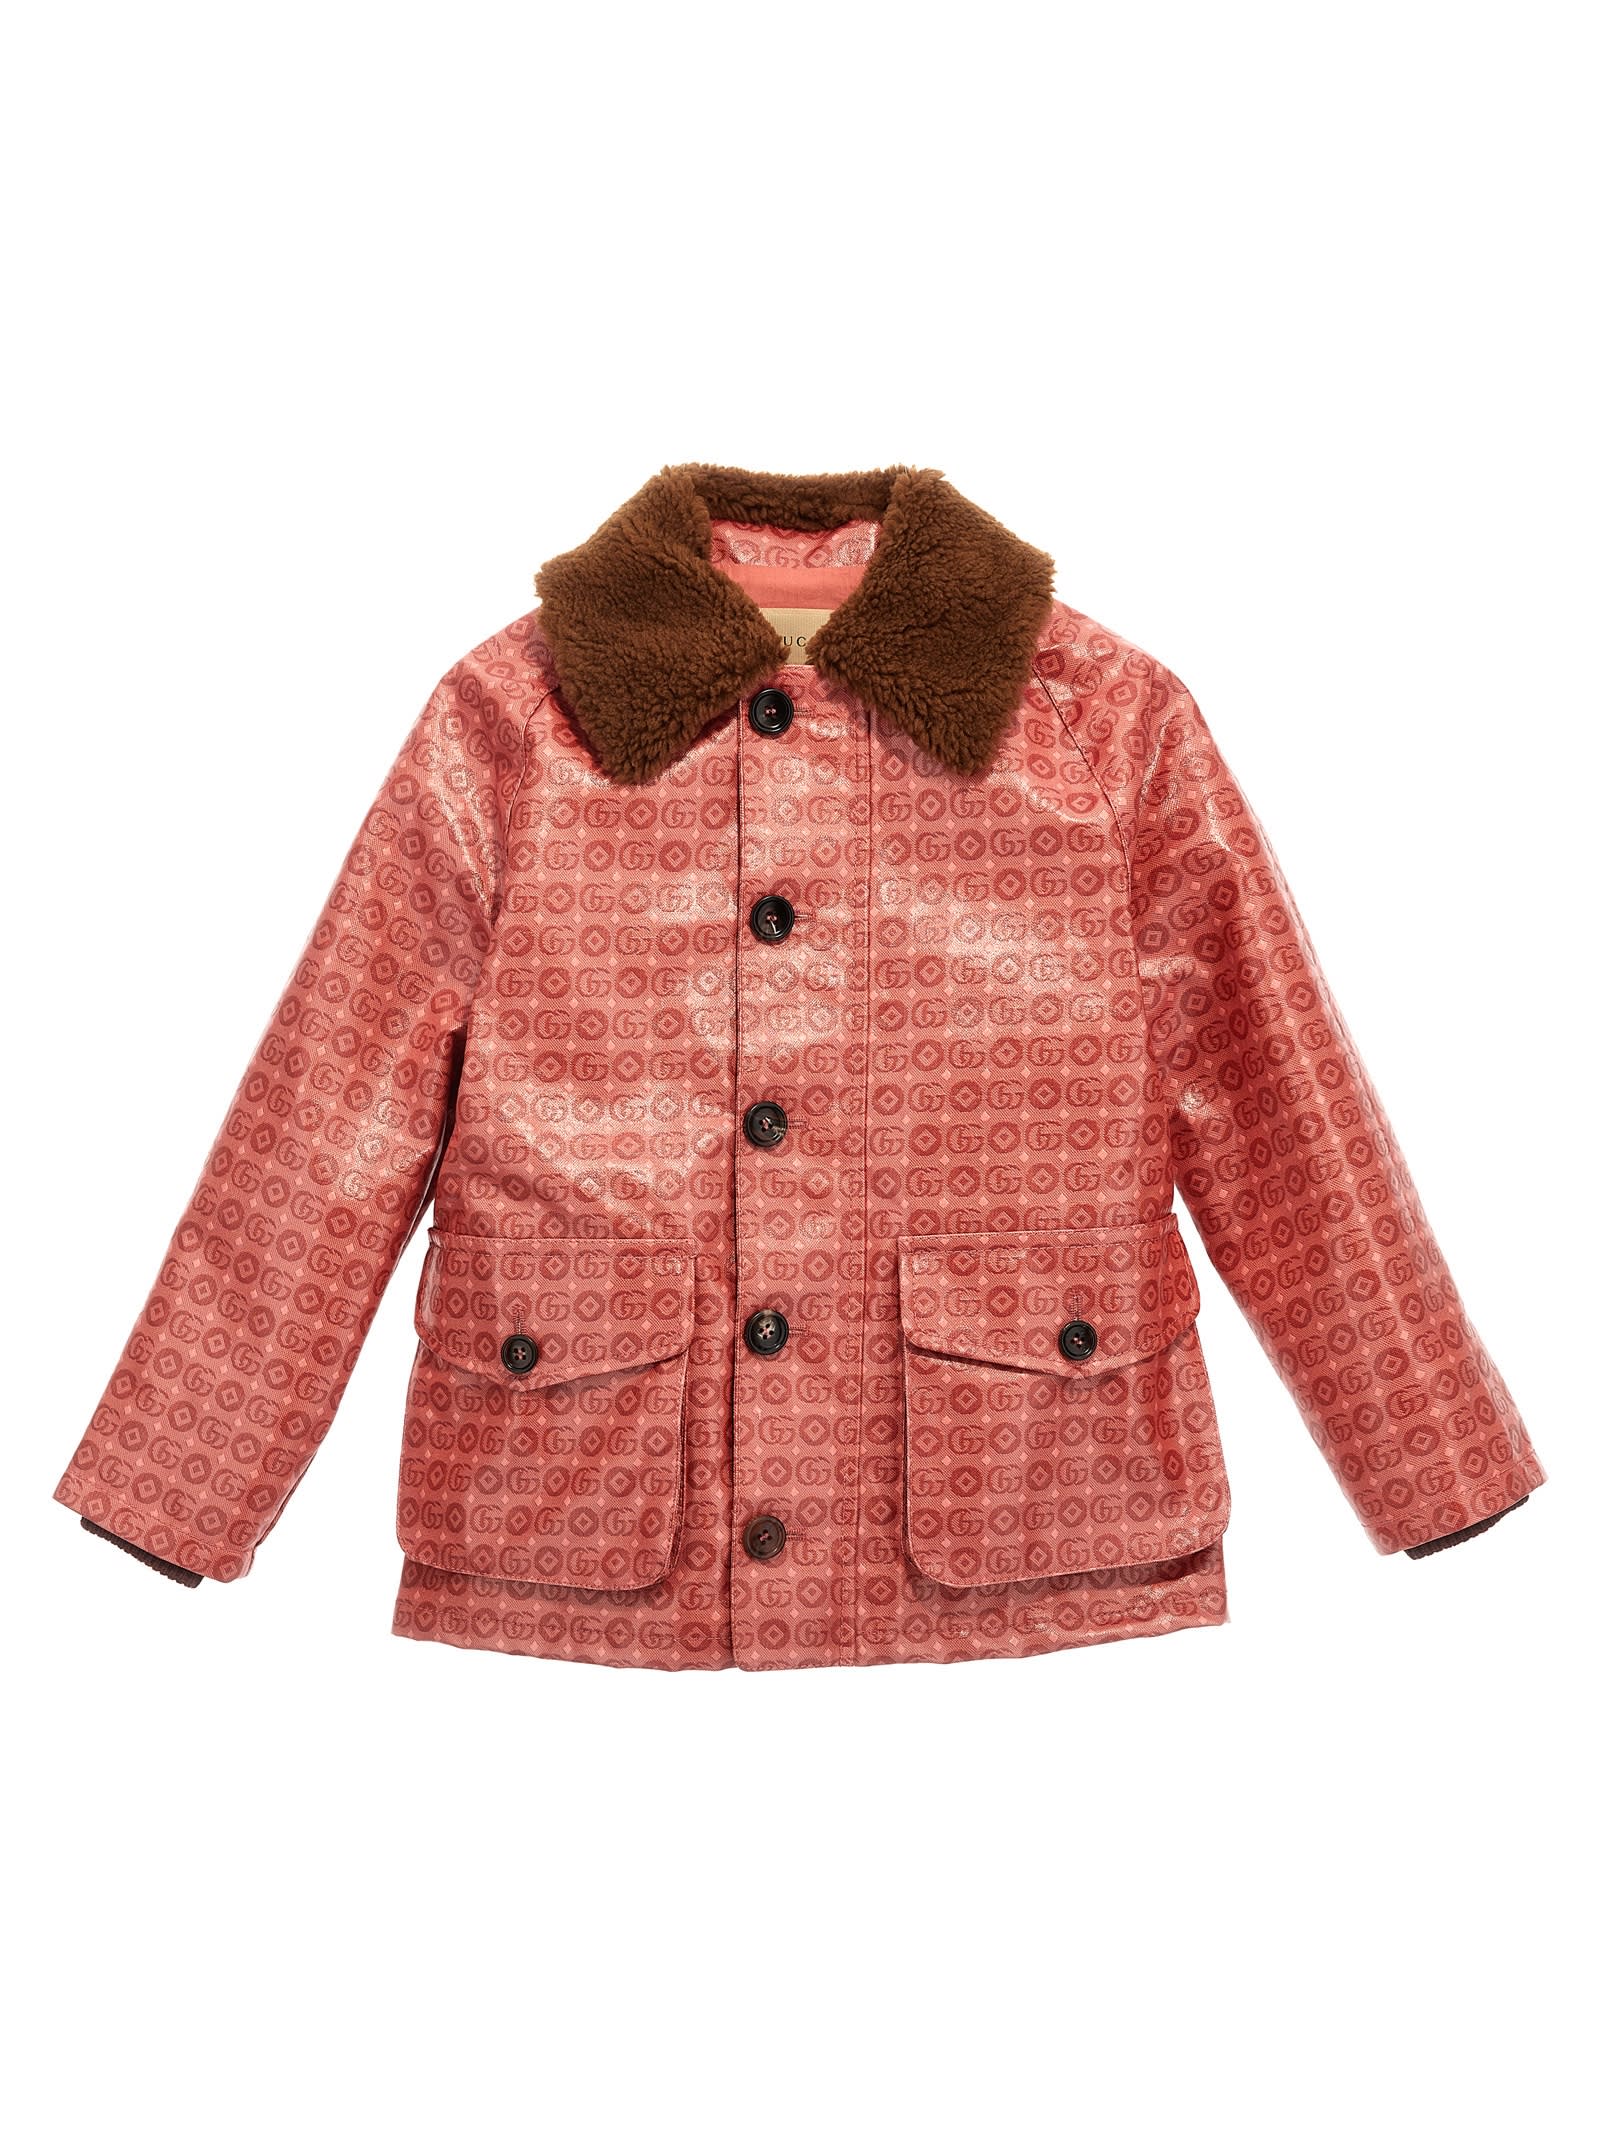 Gucci Kids' Gg Dots Jacket In Pink